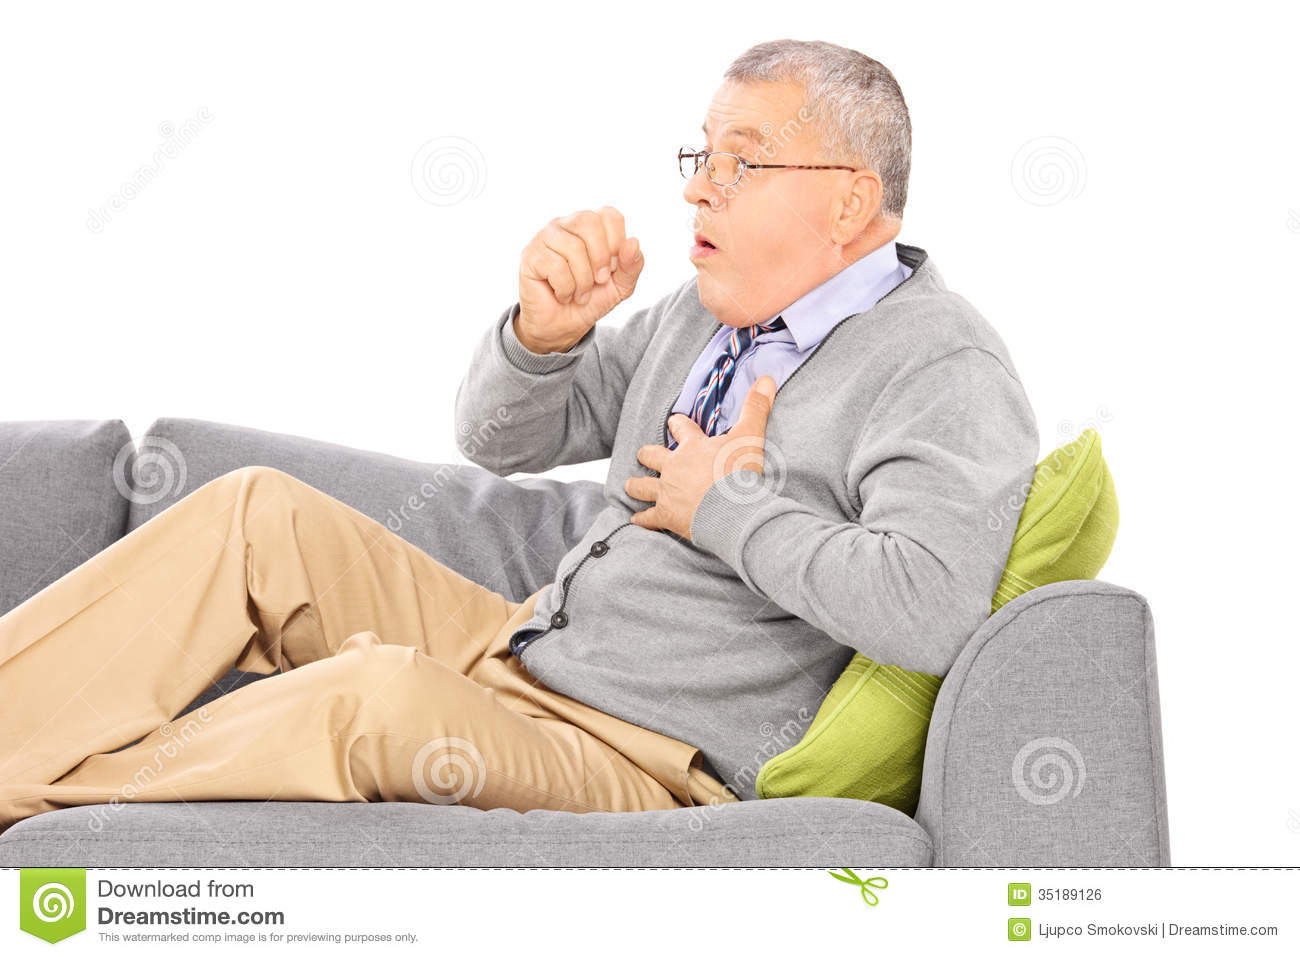 Cough Clipart On A Sofa Coughing Royalty